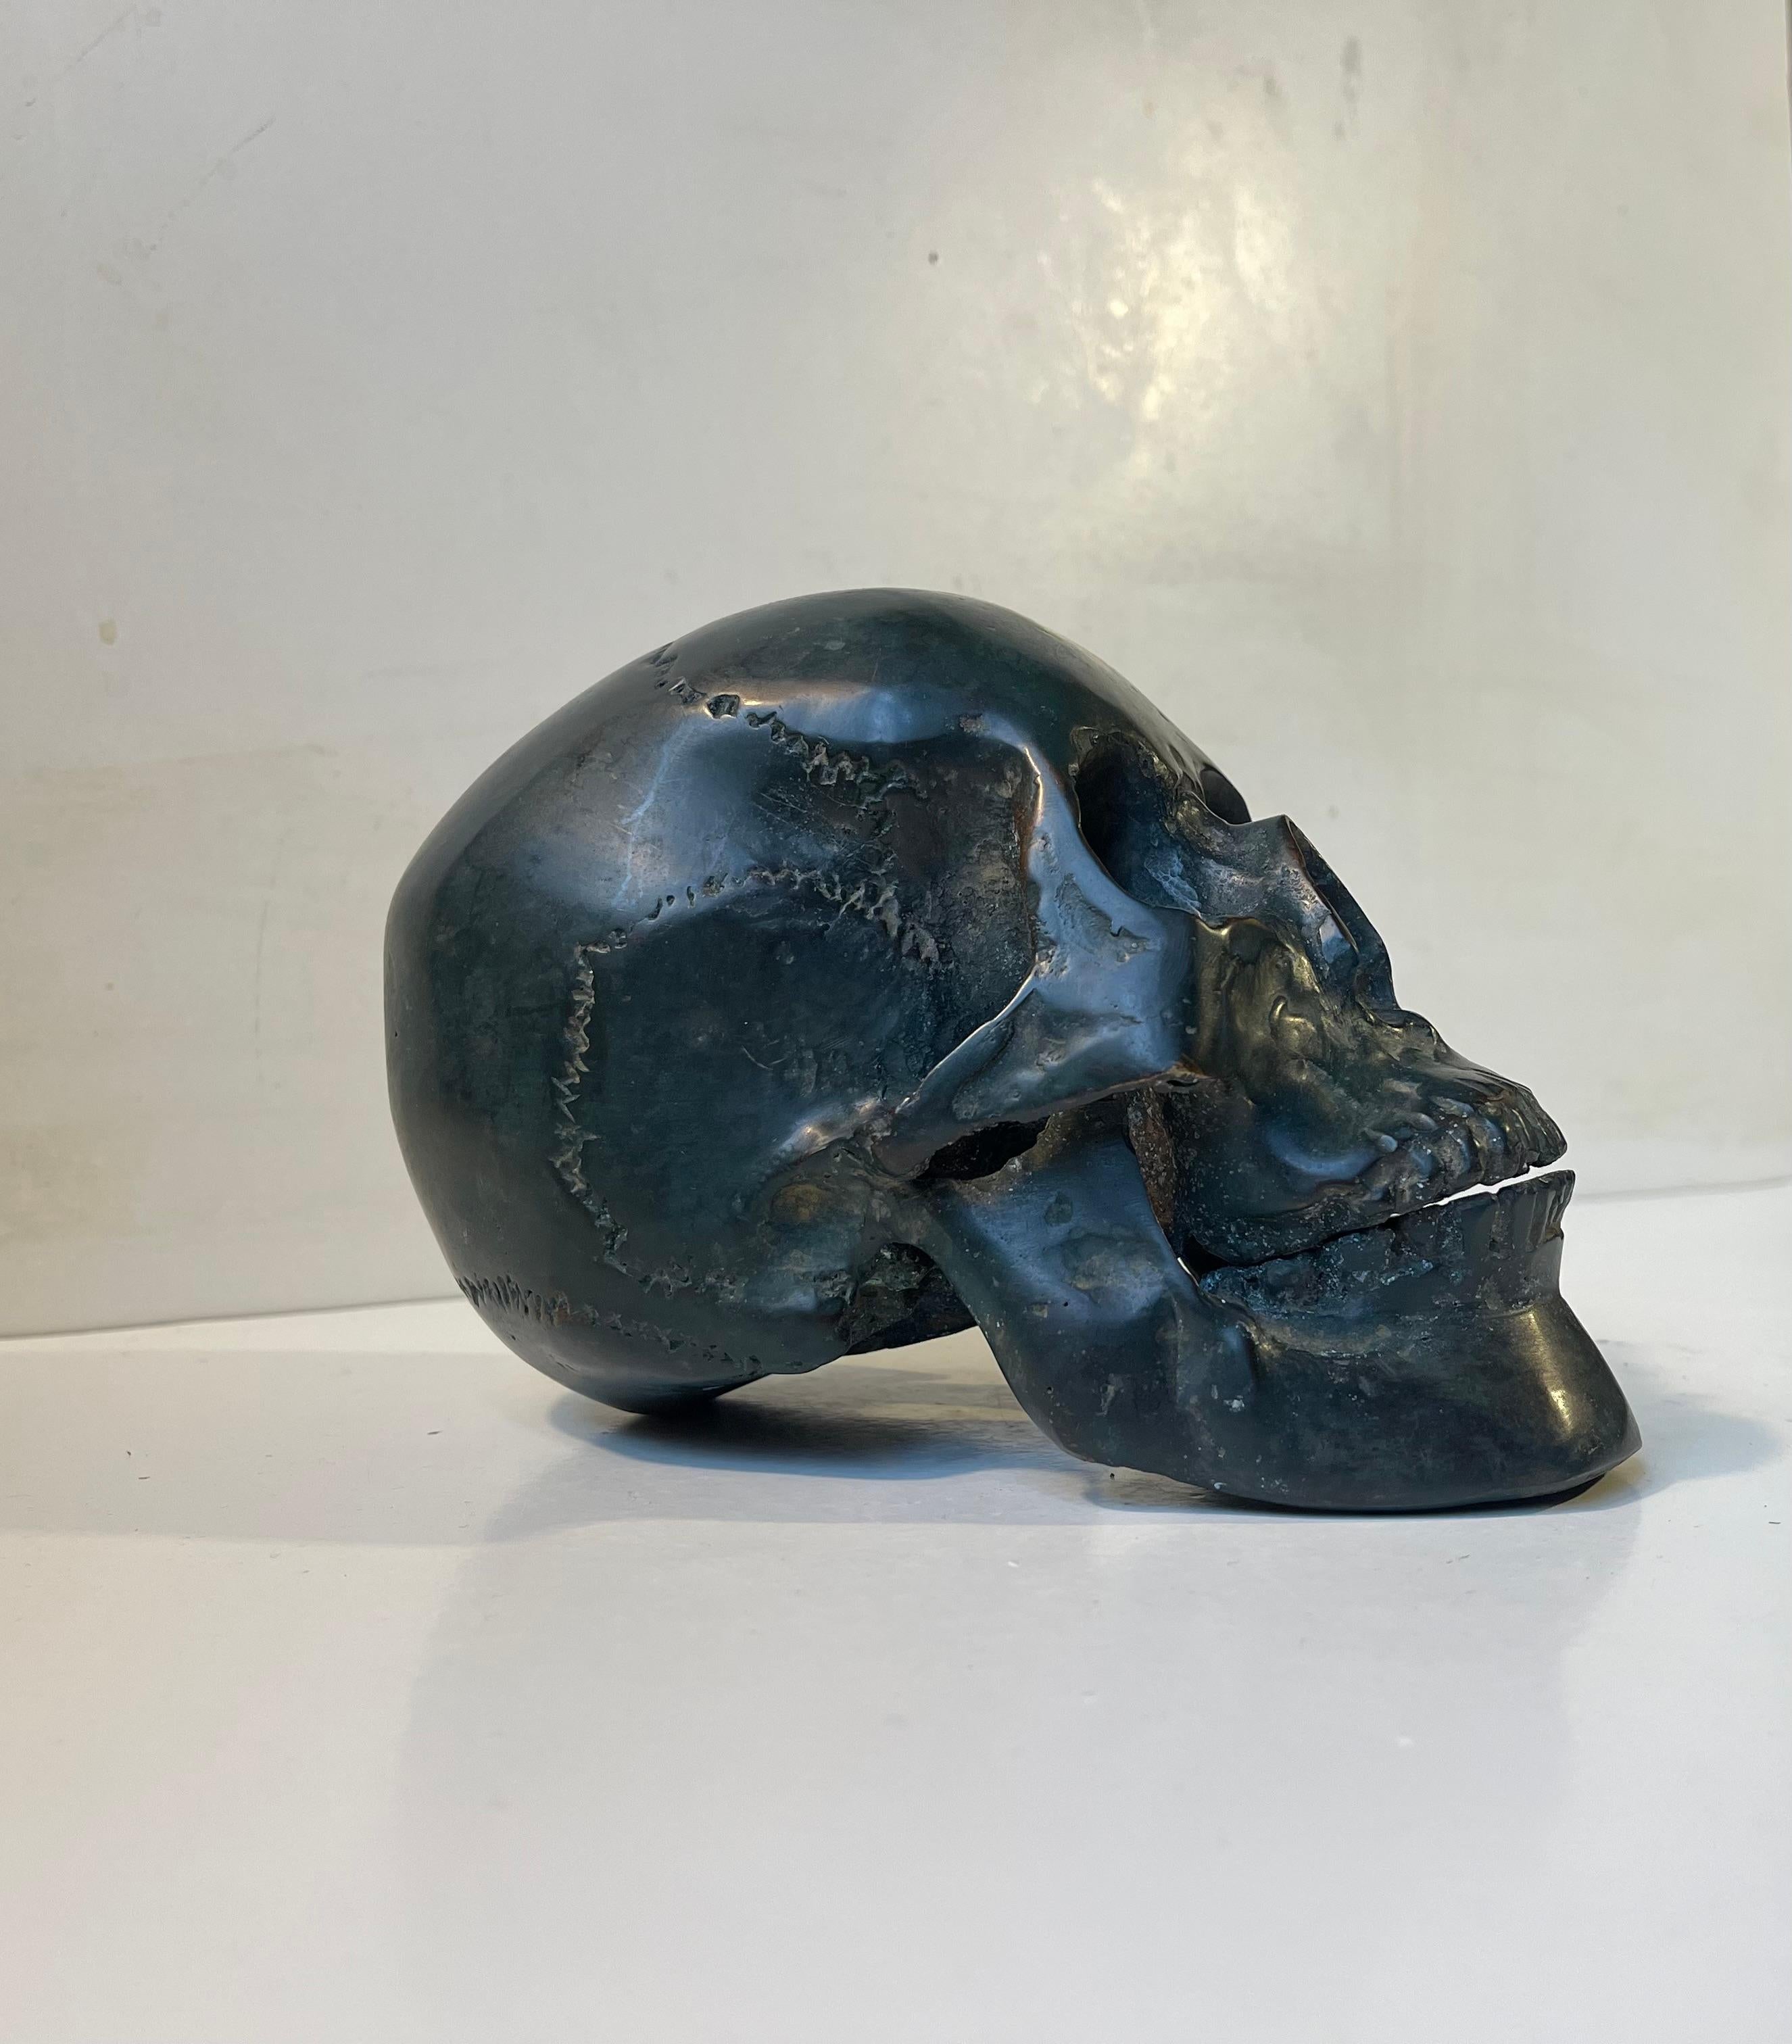 A 1:1 cast model of a human skull in patinated bronze. Its made from a cast of a real human skull, probably female, and is complete with teeth, lower- and upper jaw. This particular example shows patina and ware. The skull as a symbol serves as a